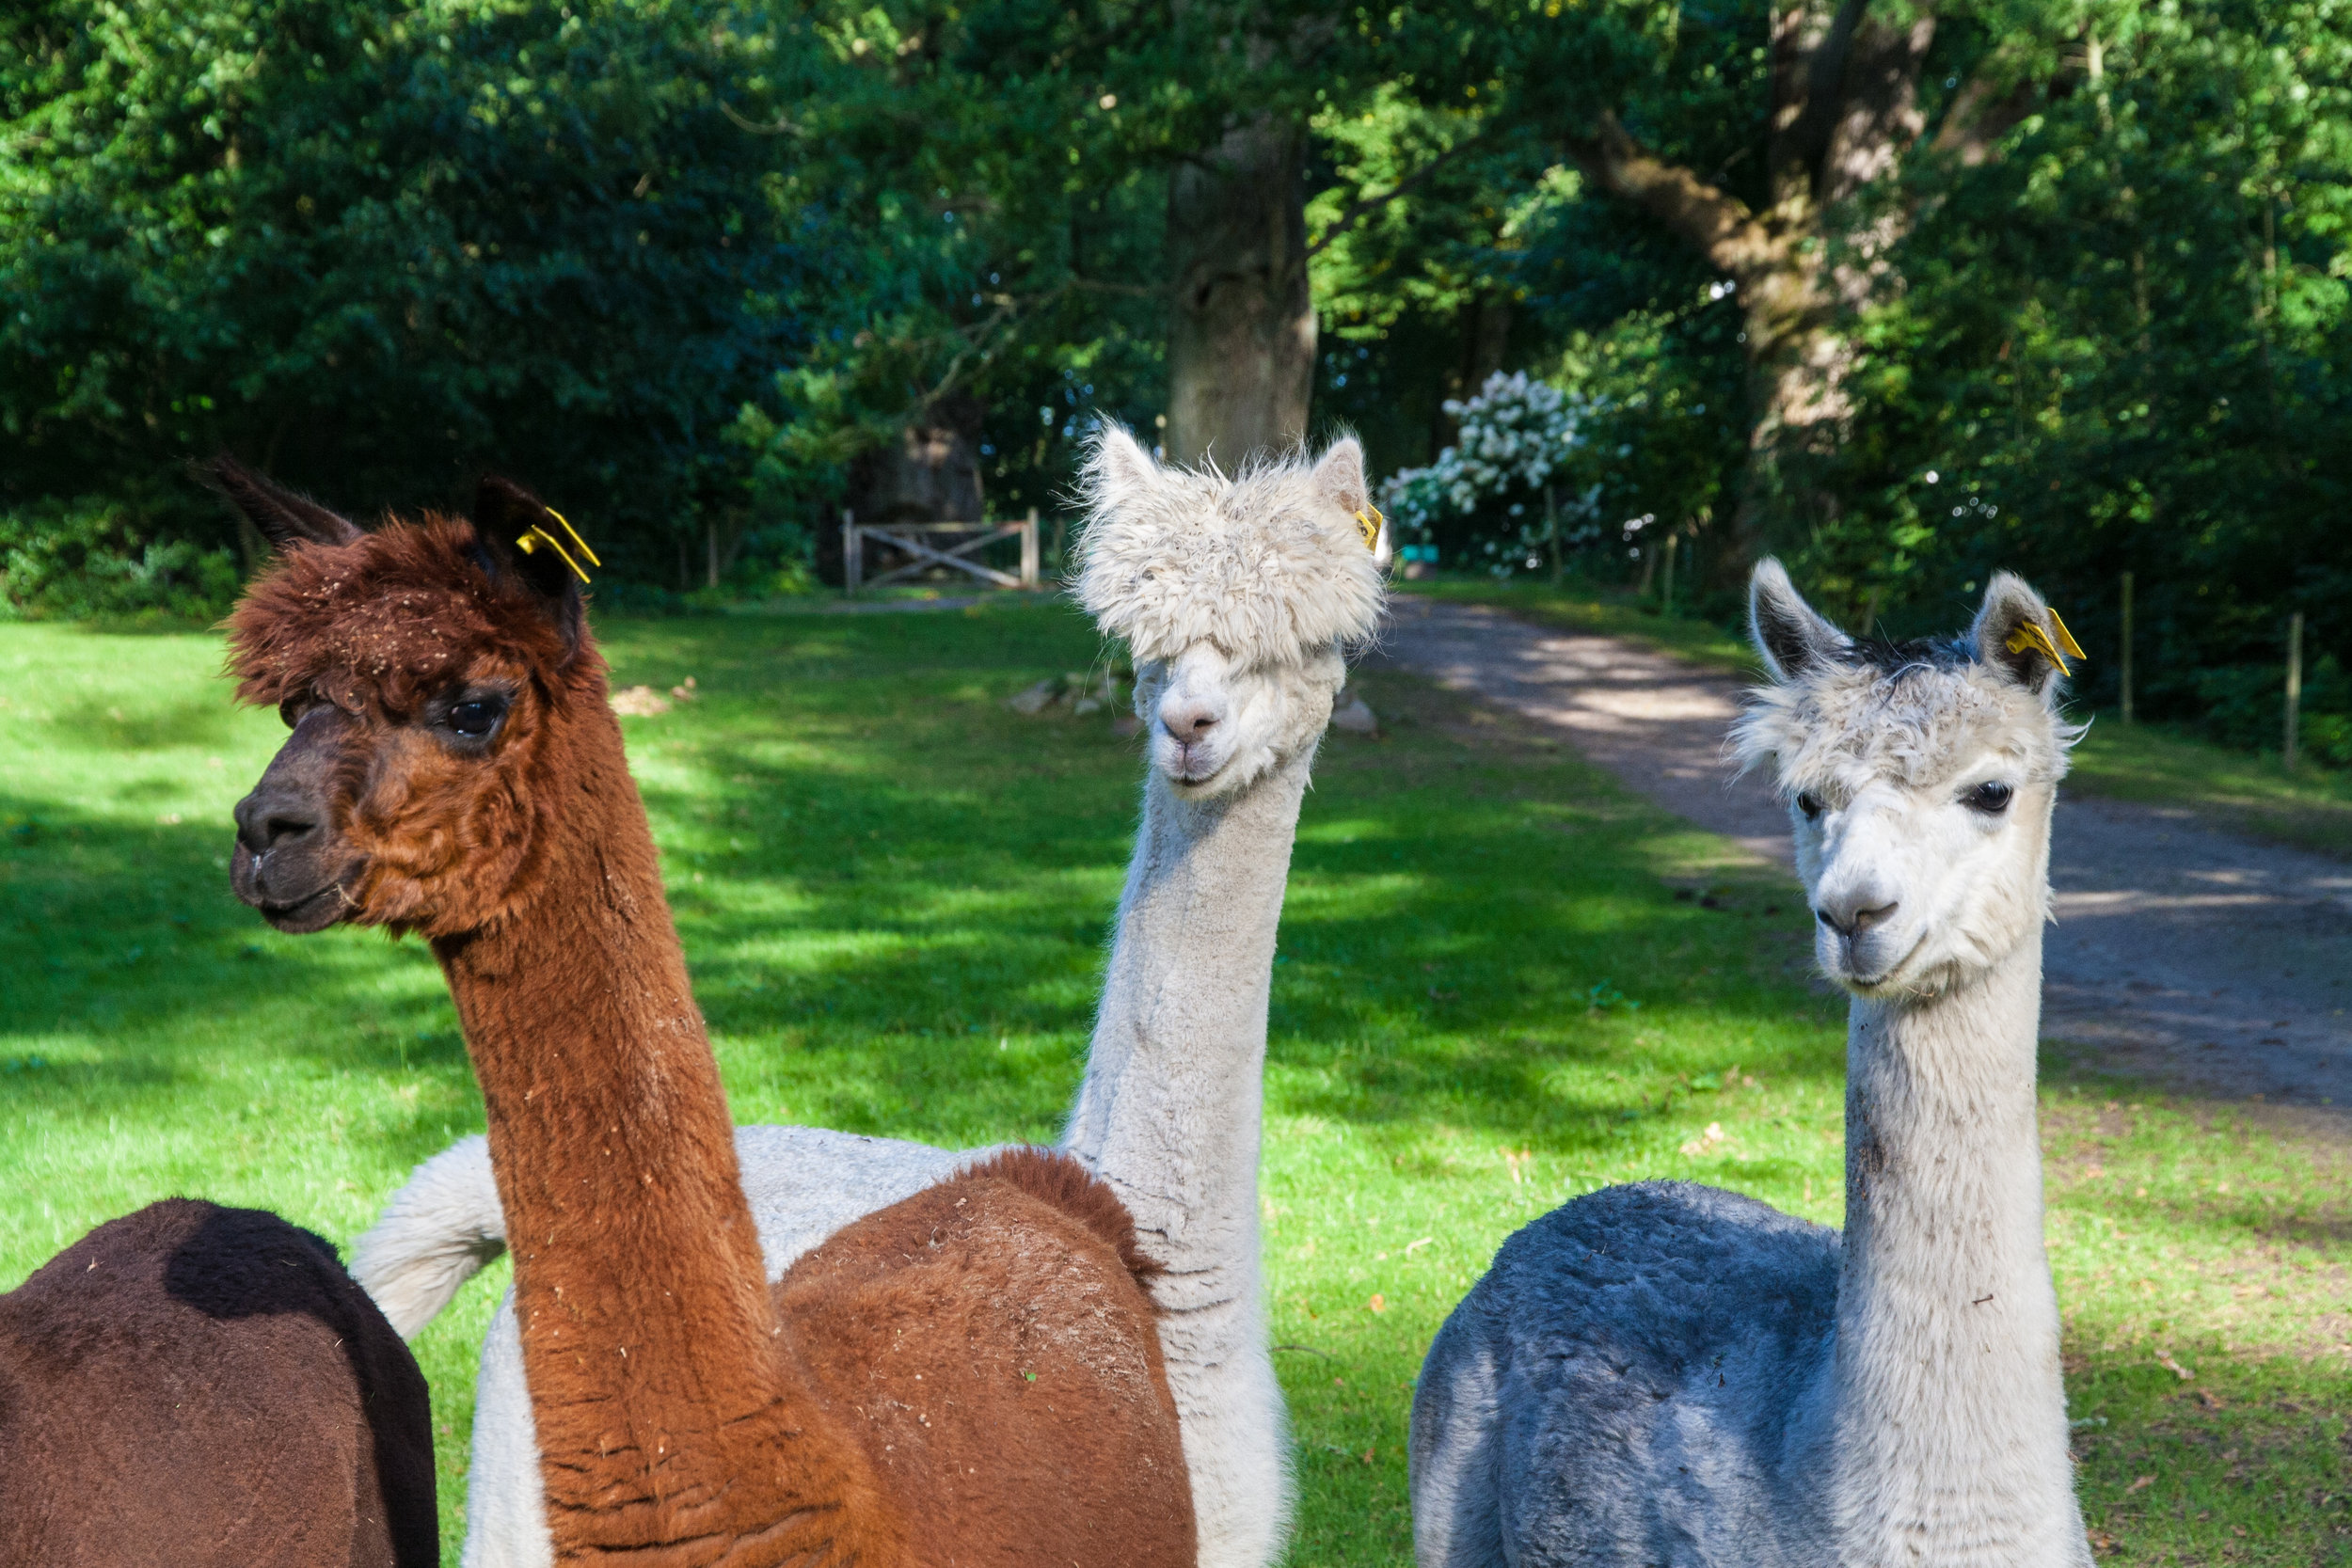  Curious alpacas keep an eye on things - and visitors - in the park. 